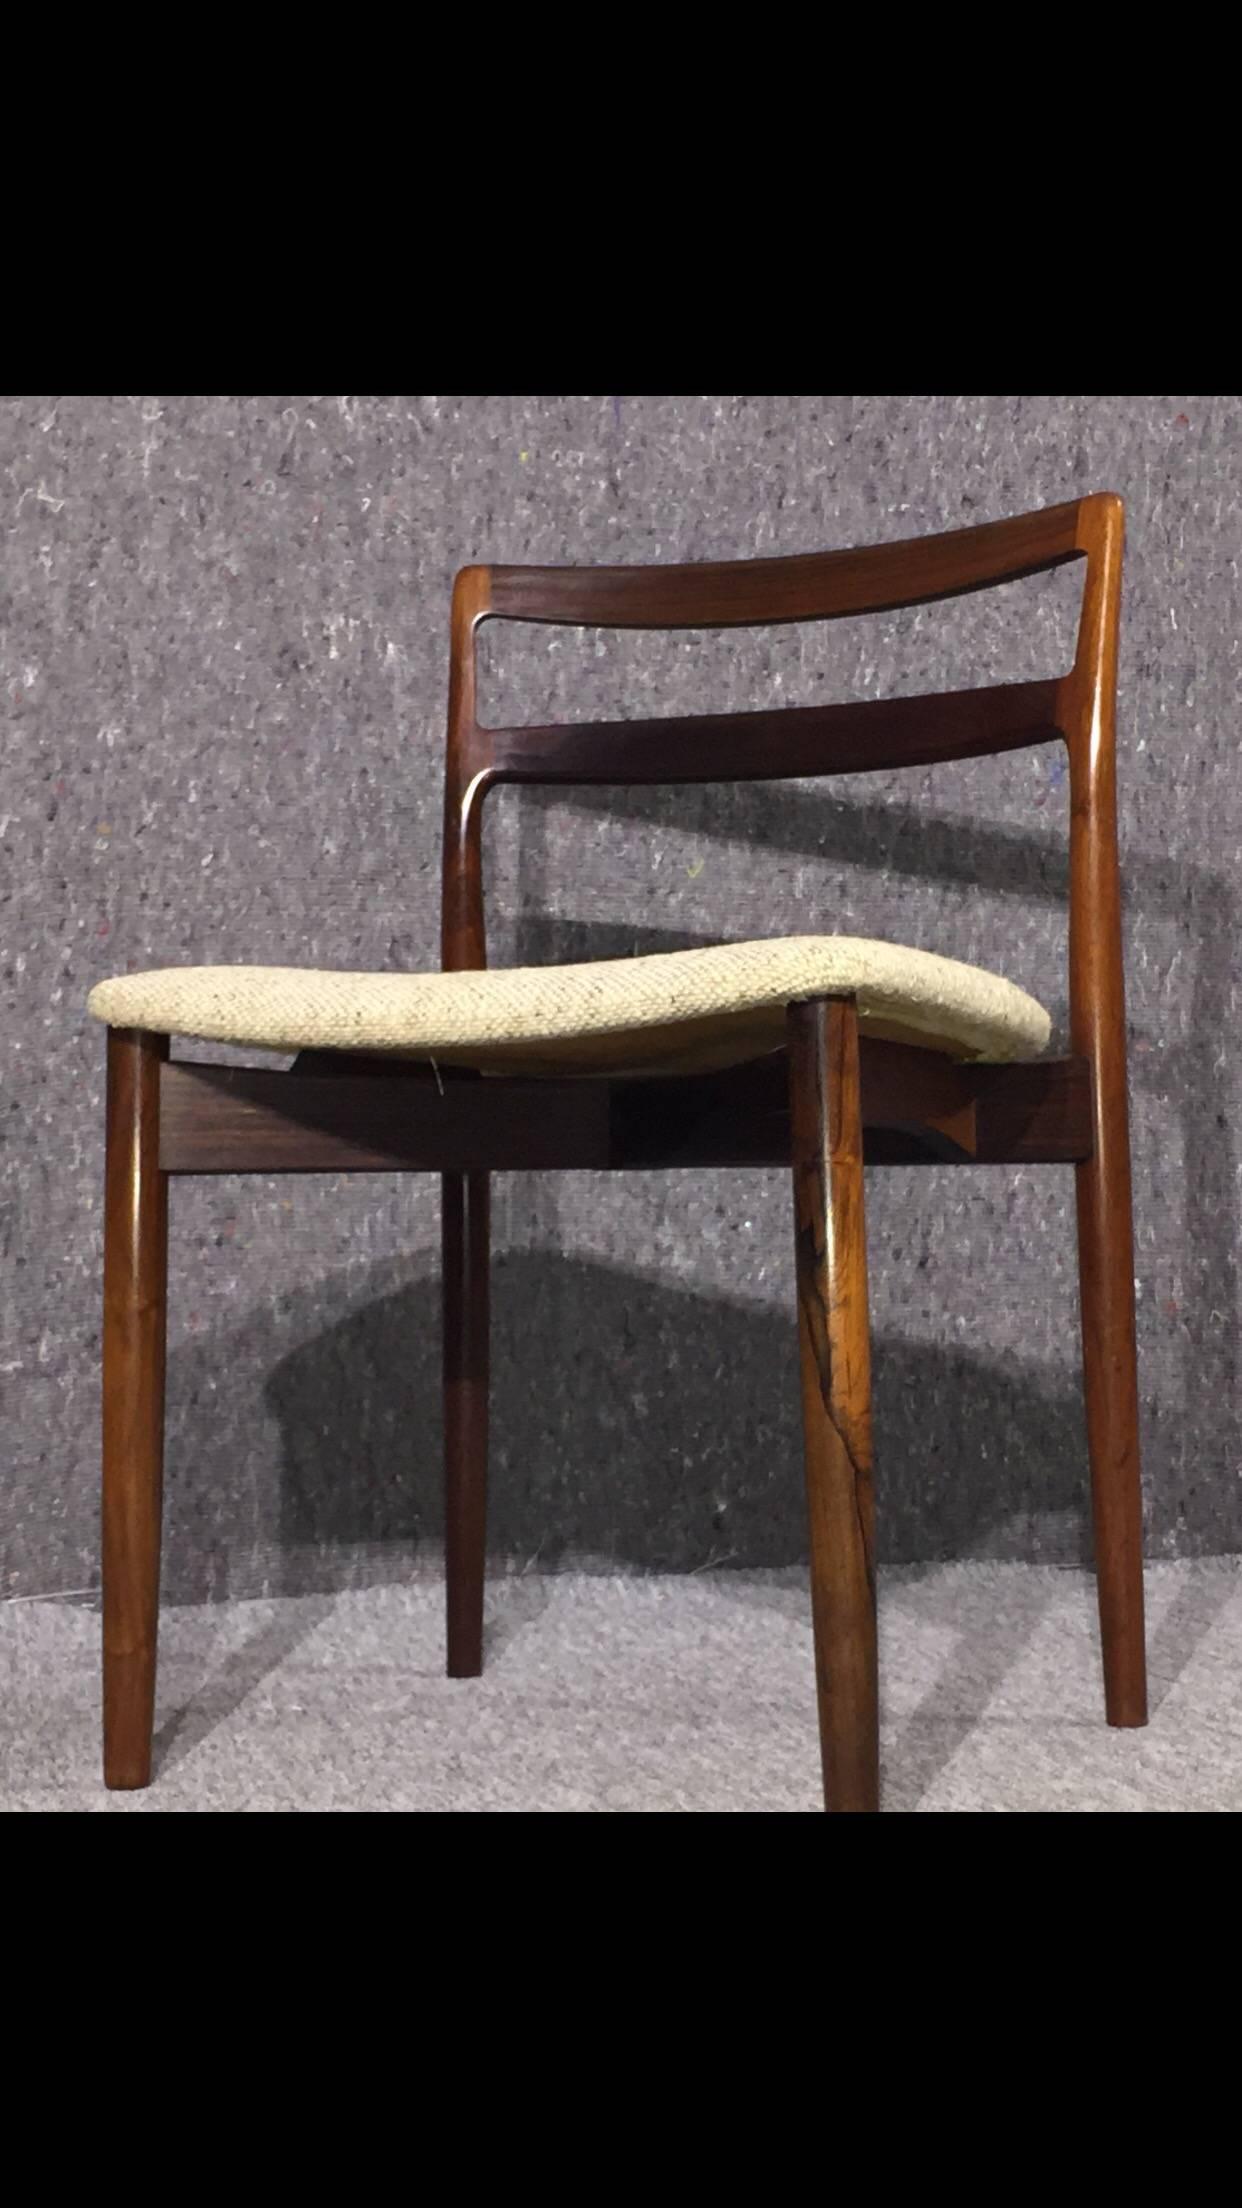 Stunning dining room chairs designed by Harry Østergaard in the 1960s and produced by Randers Møbelfabrik. The frame is made out of rosewood and upholstery in light fabric.